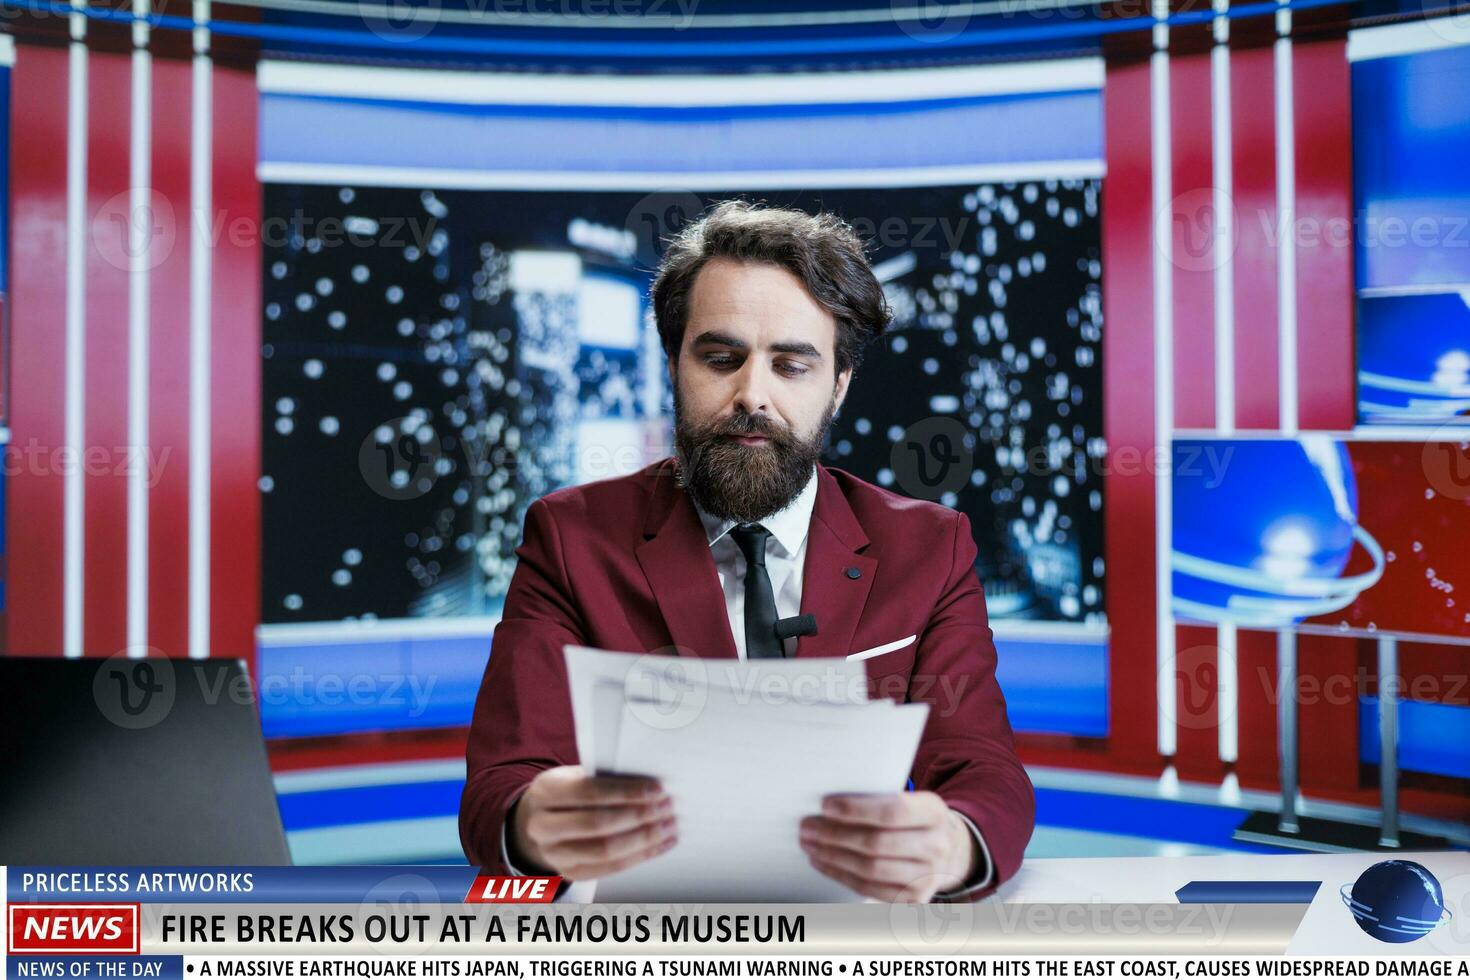 Anchorman reveals museum on fire breaking news, many artifacts and artworks are in danger of burning. News broadcaster being worried about historical pieces at famous landmark. photo